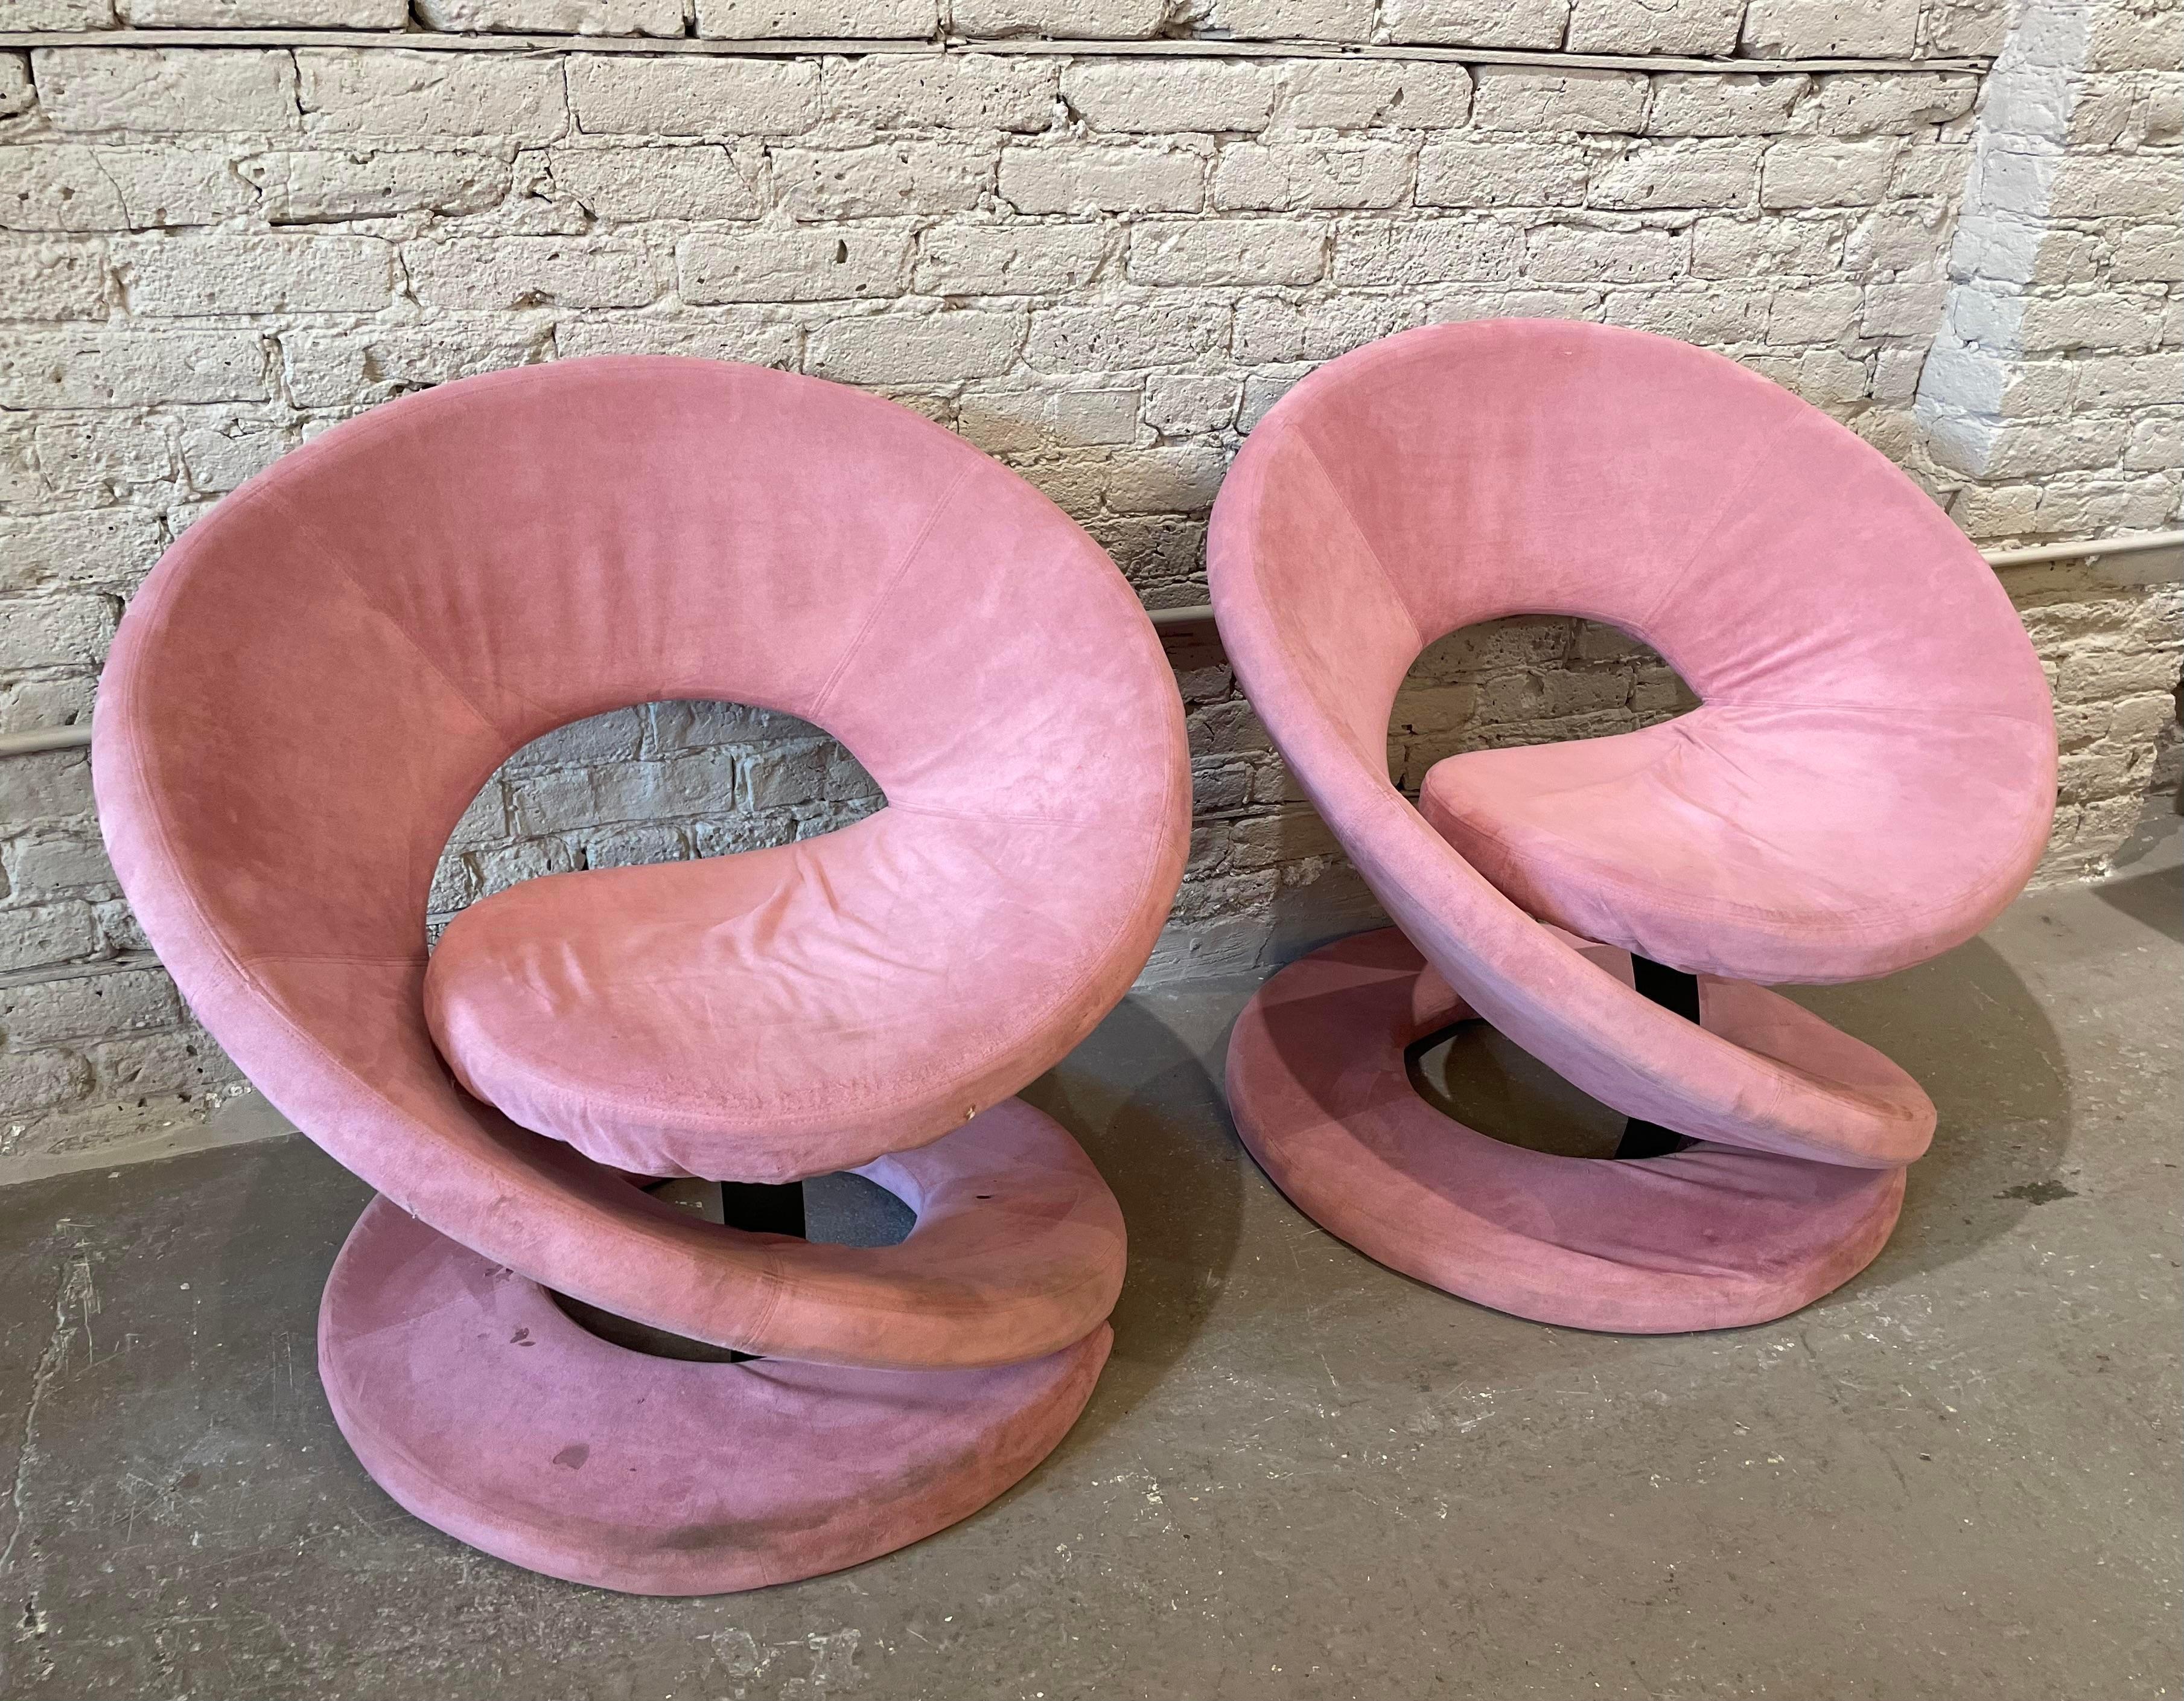 Post-Modern 1980s Postmodern Corkscrew Chairs Attributed to Quebec 69 Jaymar - a Pair For Sale